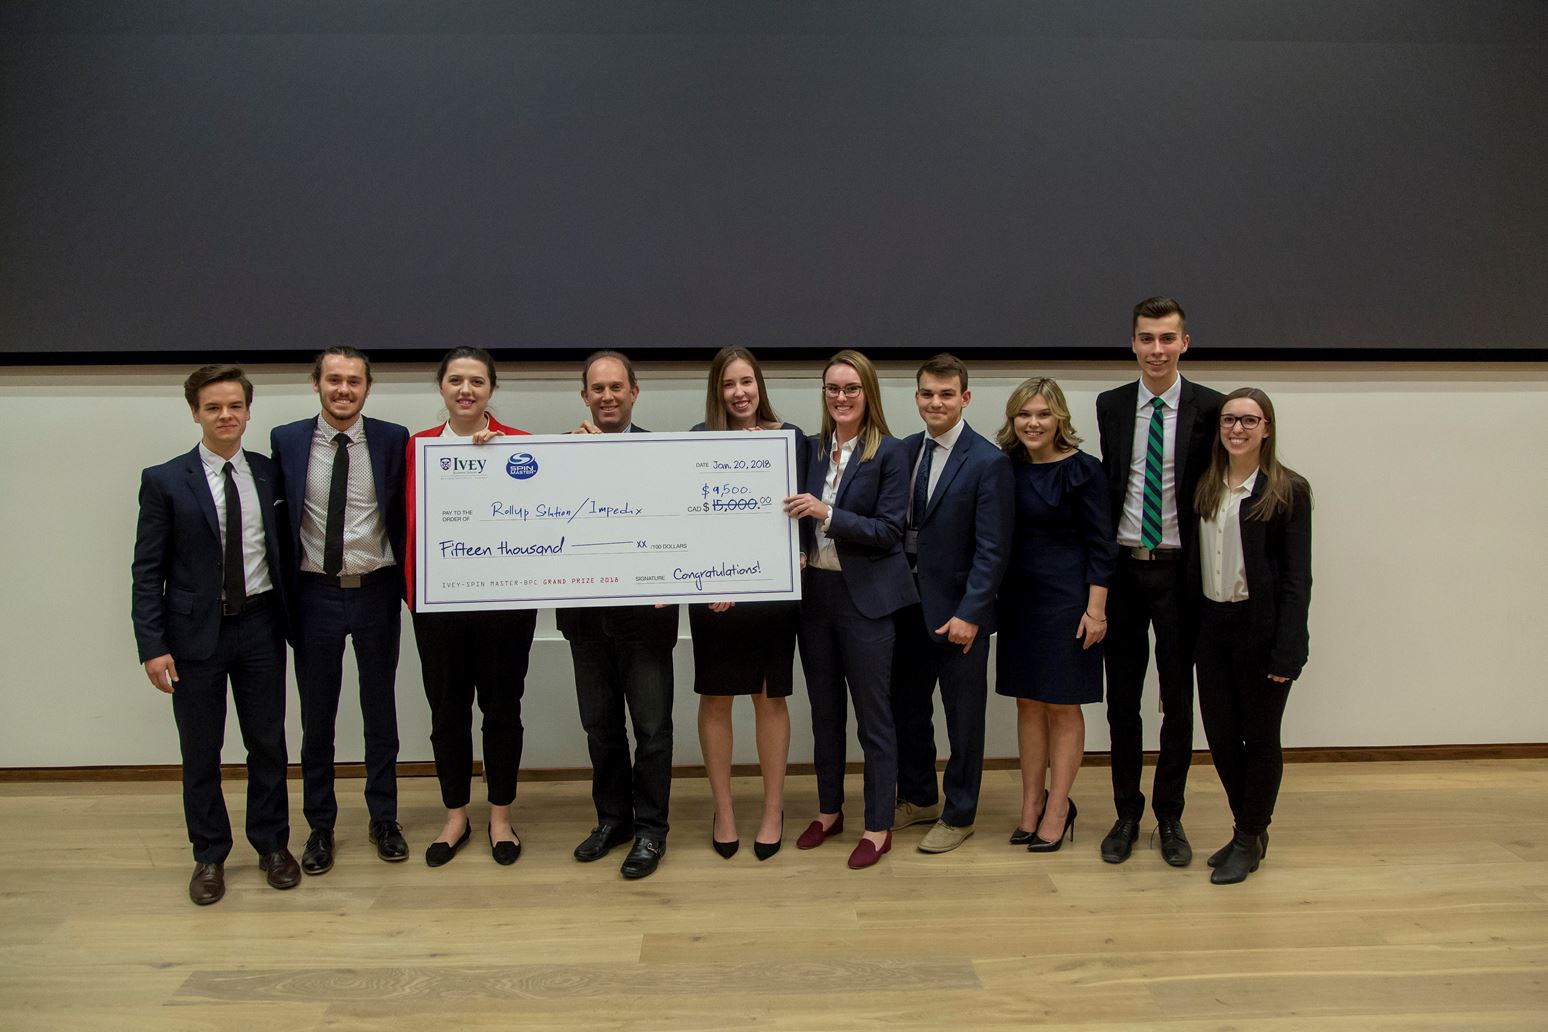 2018 Spin Master - Ivey HBA Business Plan Competition